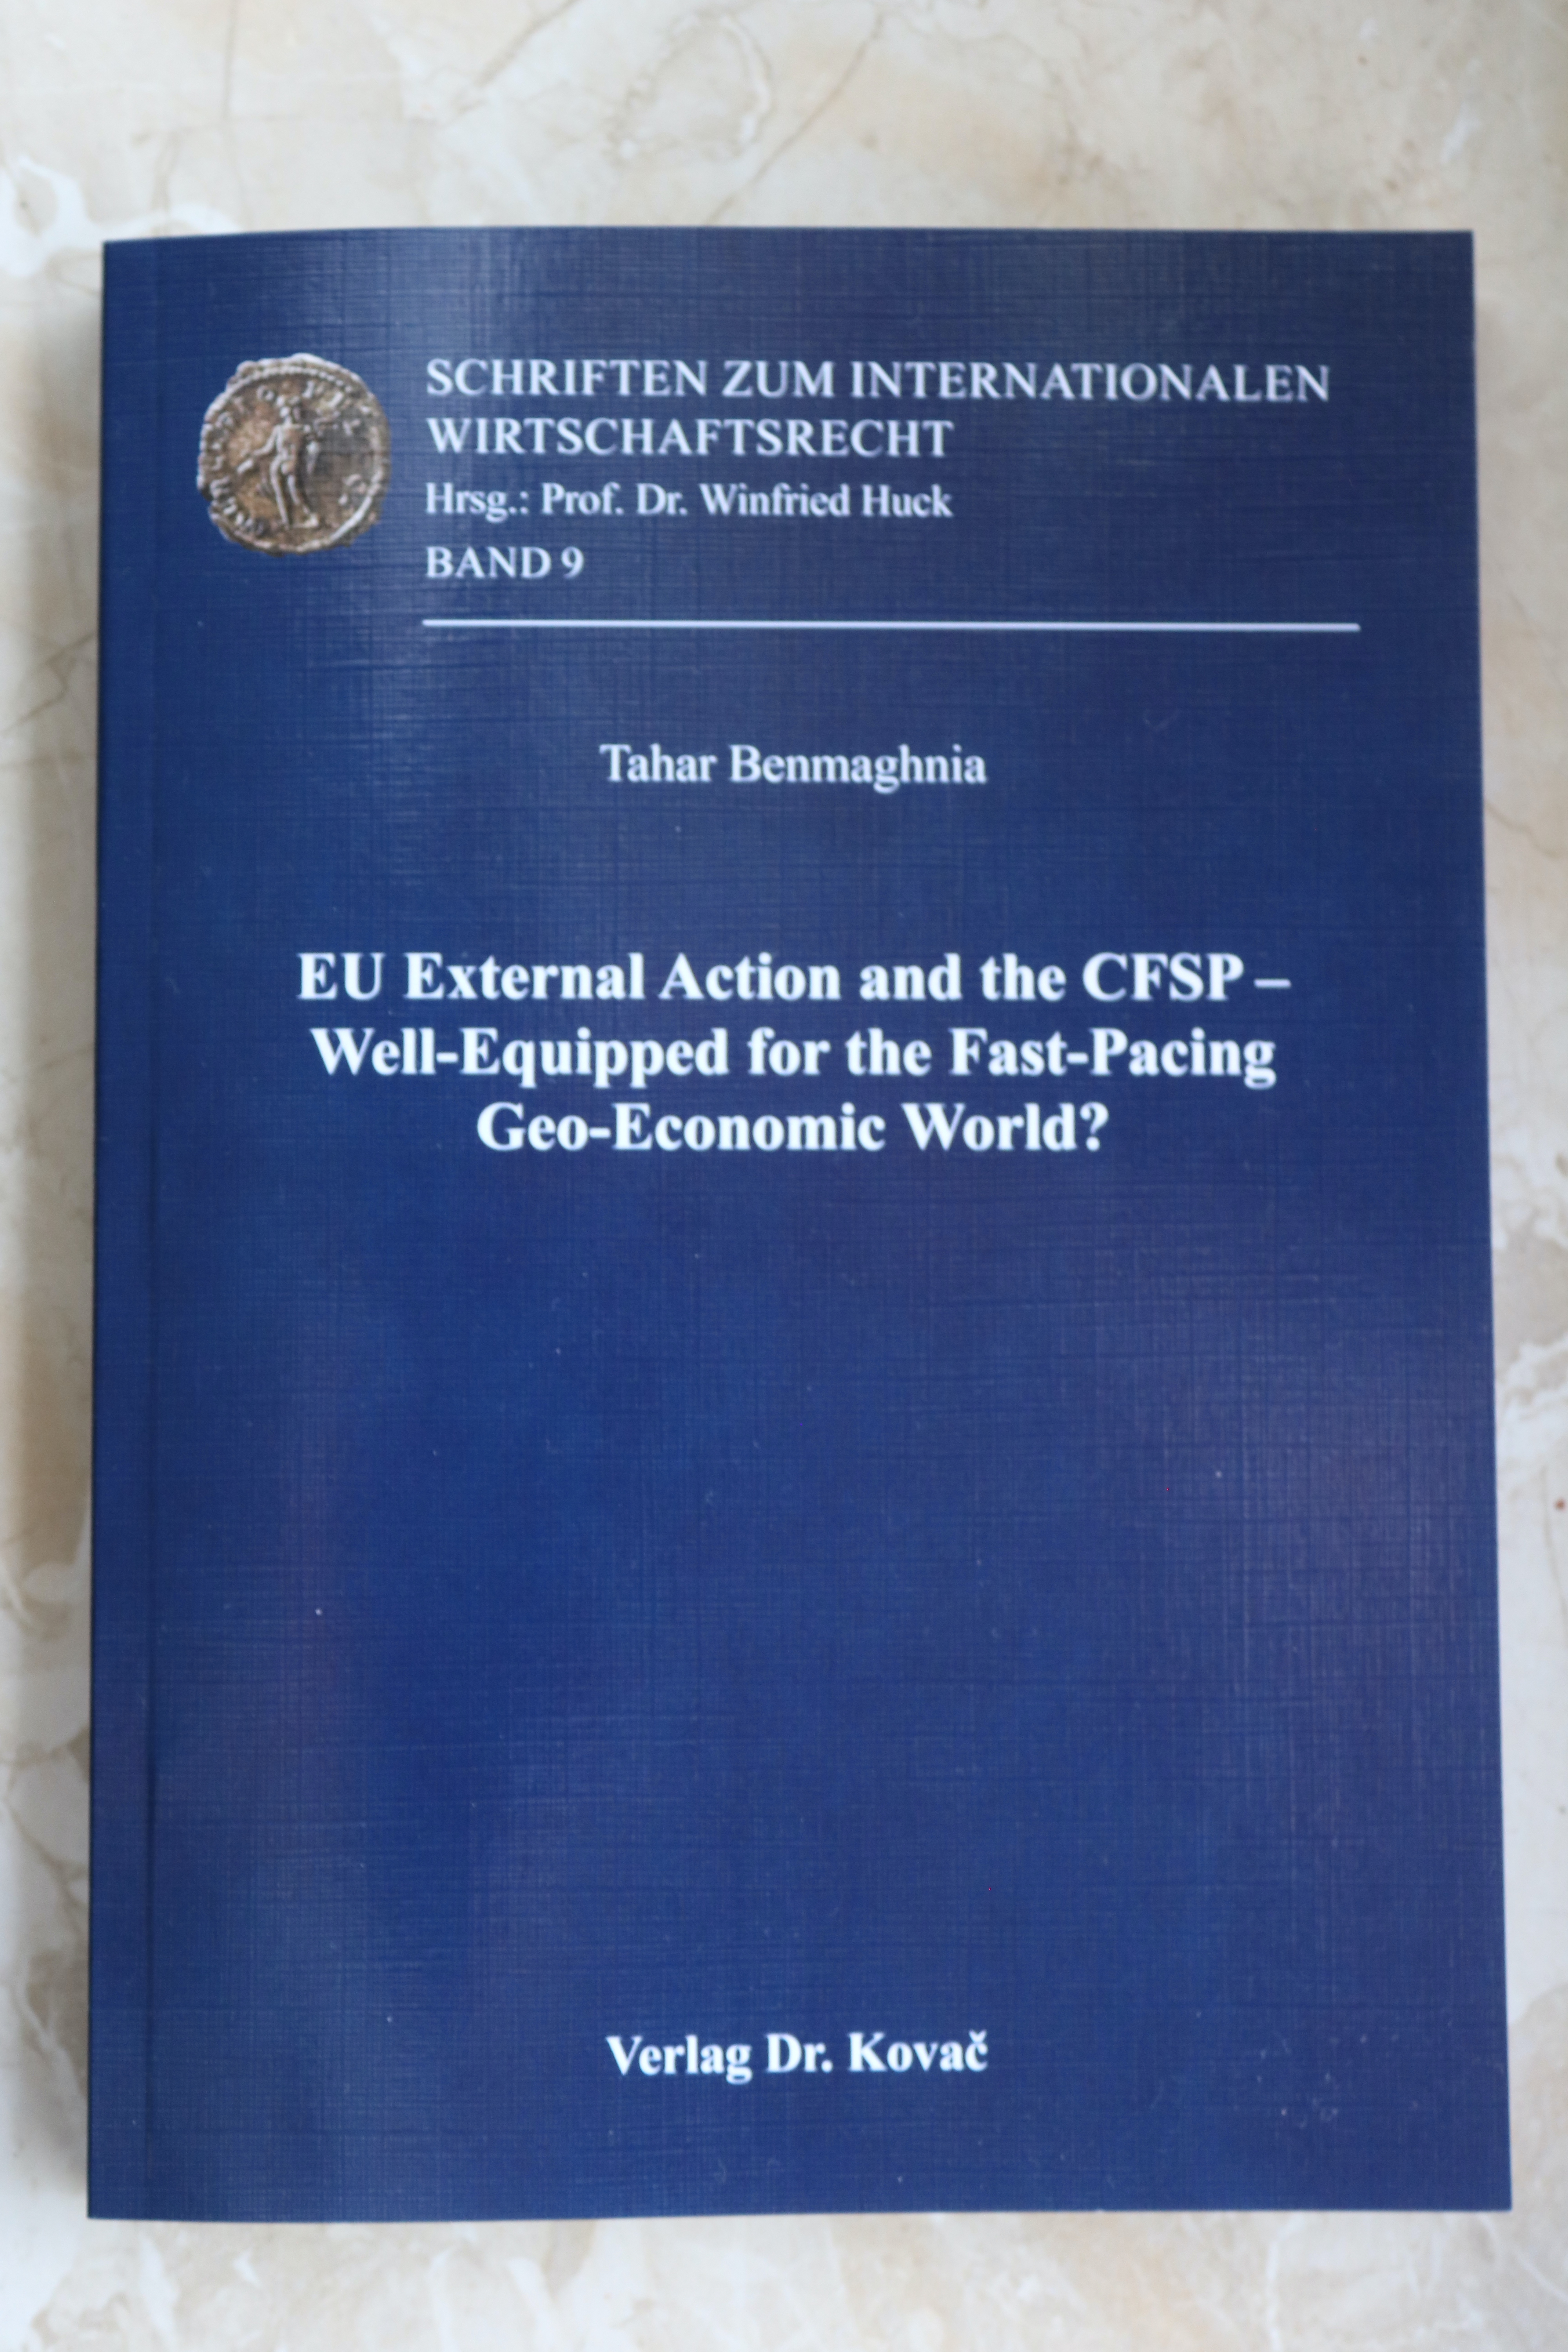 EU External Action and the CFSP - Well-Equipped for the FAst-Pacing Geo-Economic World?